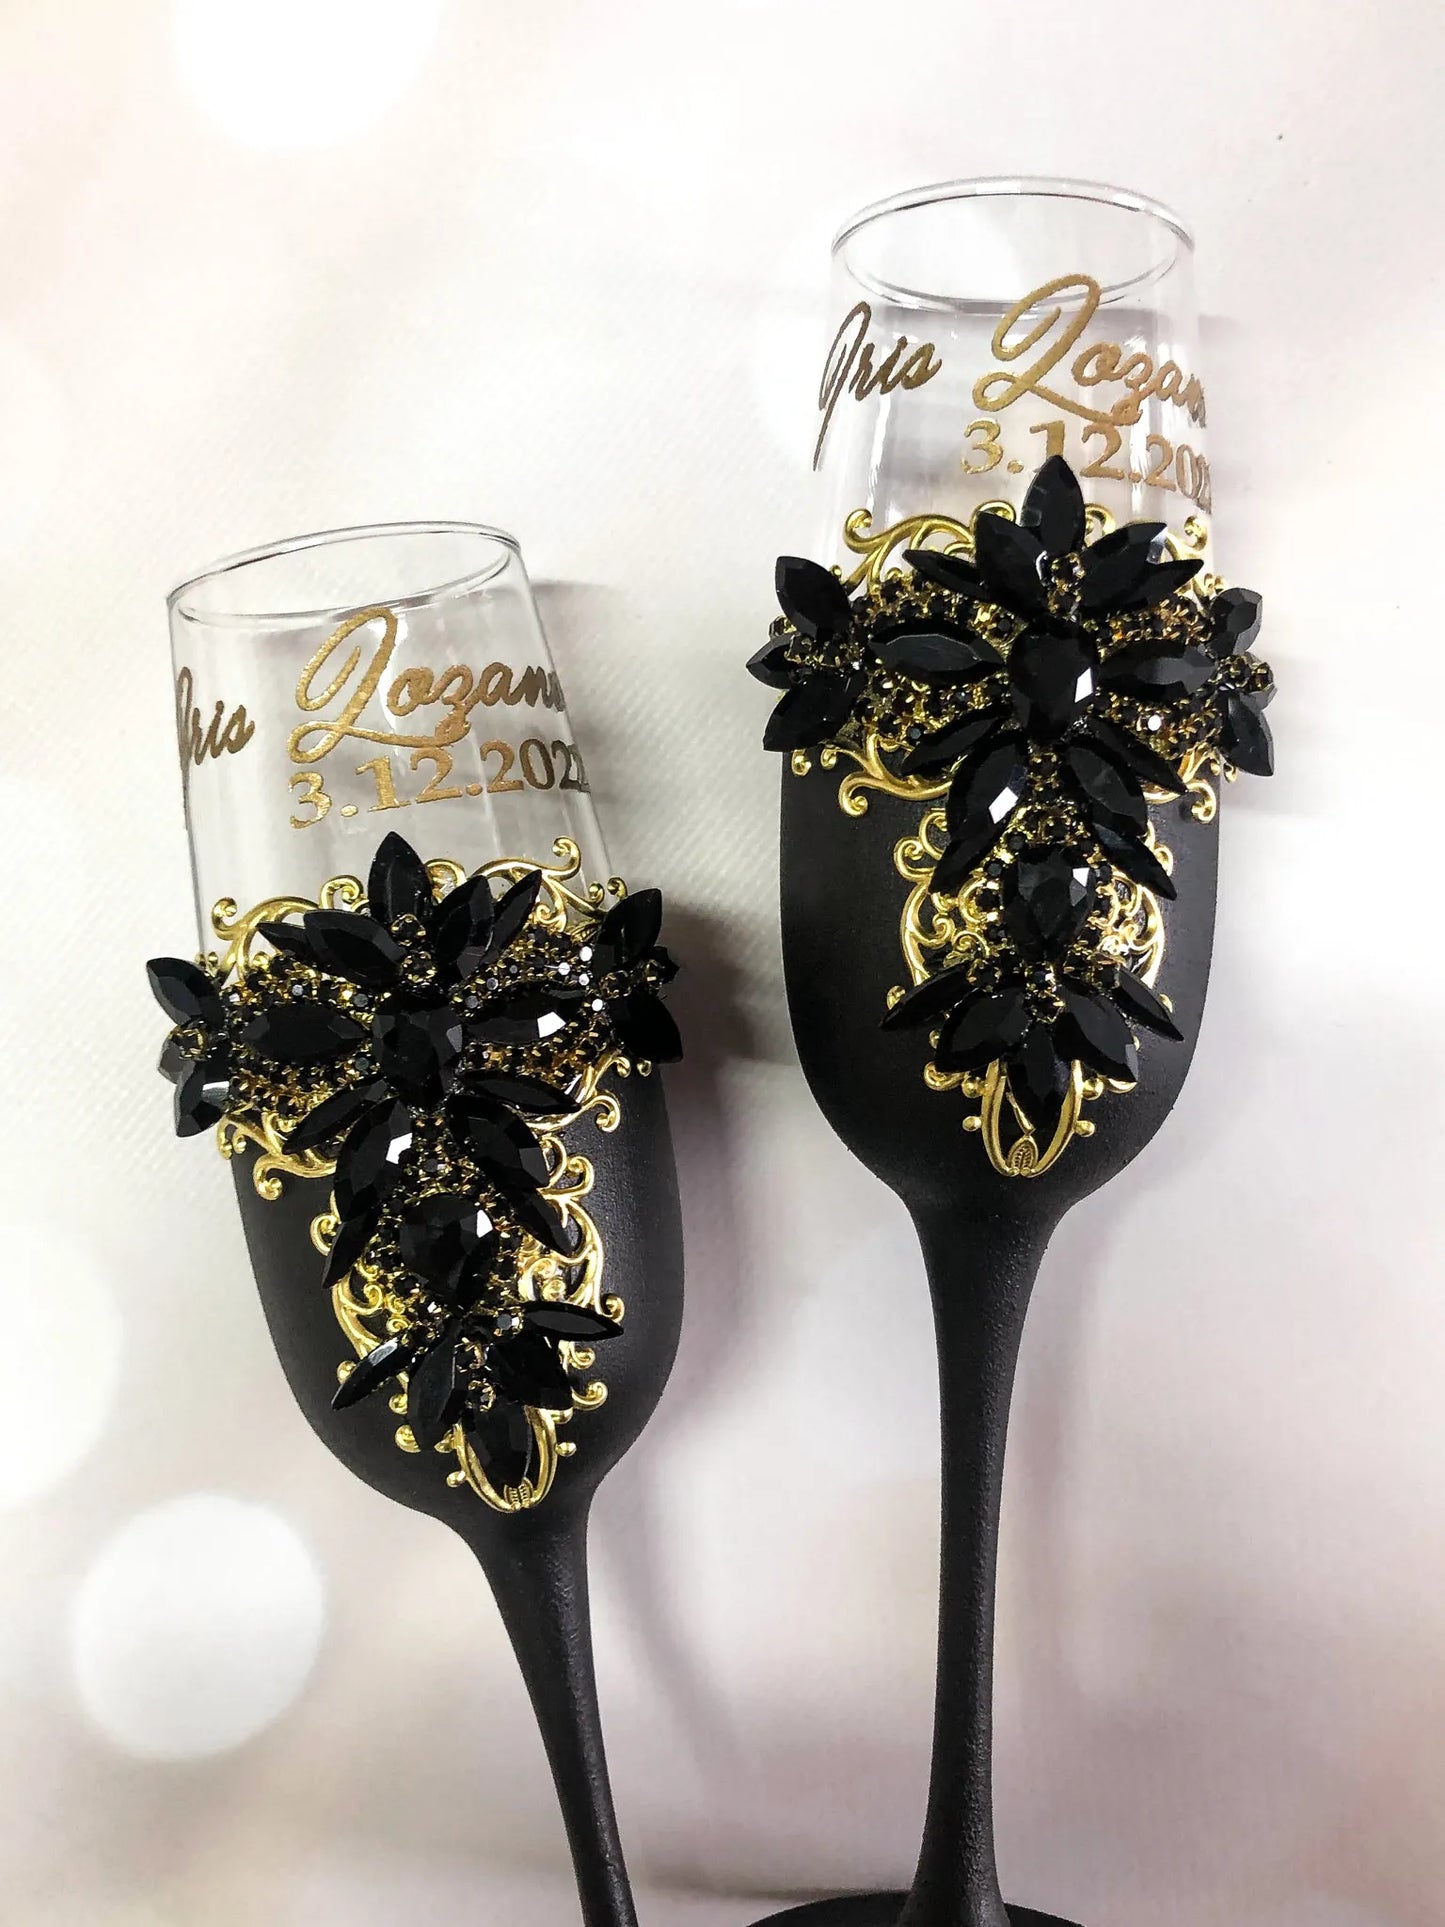 Black and silver crystal champagne glasses for weddings